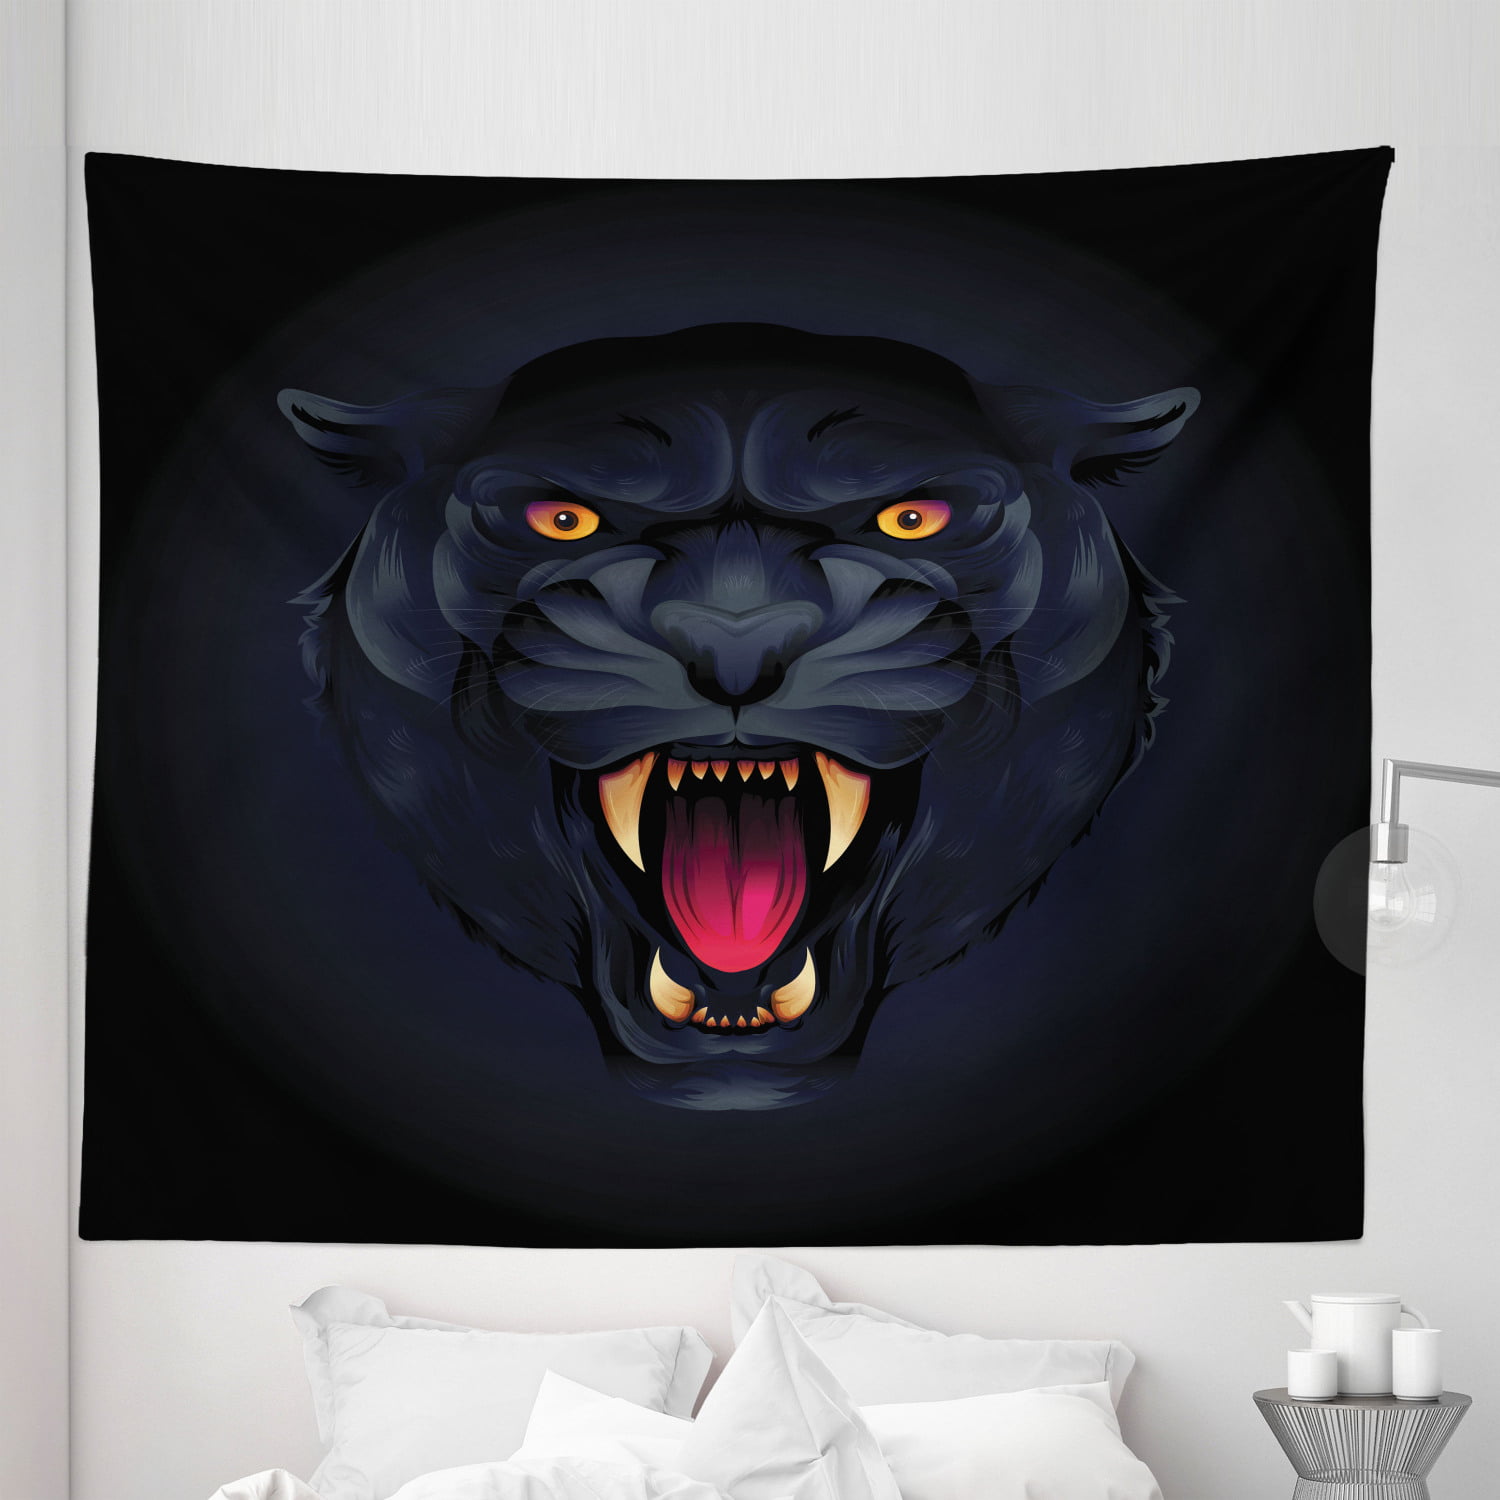 Black and White Tapestry, Roaring Panther Predator Savage Animal Big Cat  Cartoon Art Print, Fabric Wall Hanging Decor for Bedroom Living Room Dorm,  5 Sizes, Dark Blue Grey, by Ambesonne 